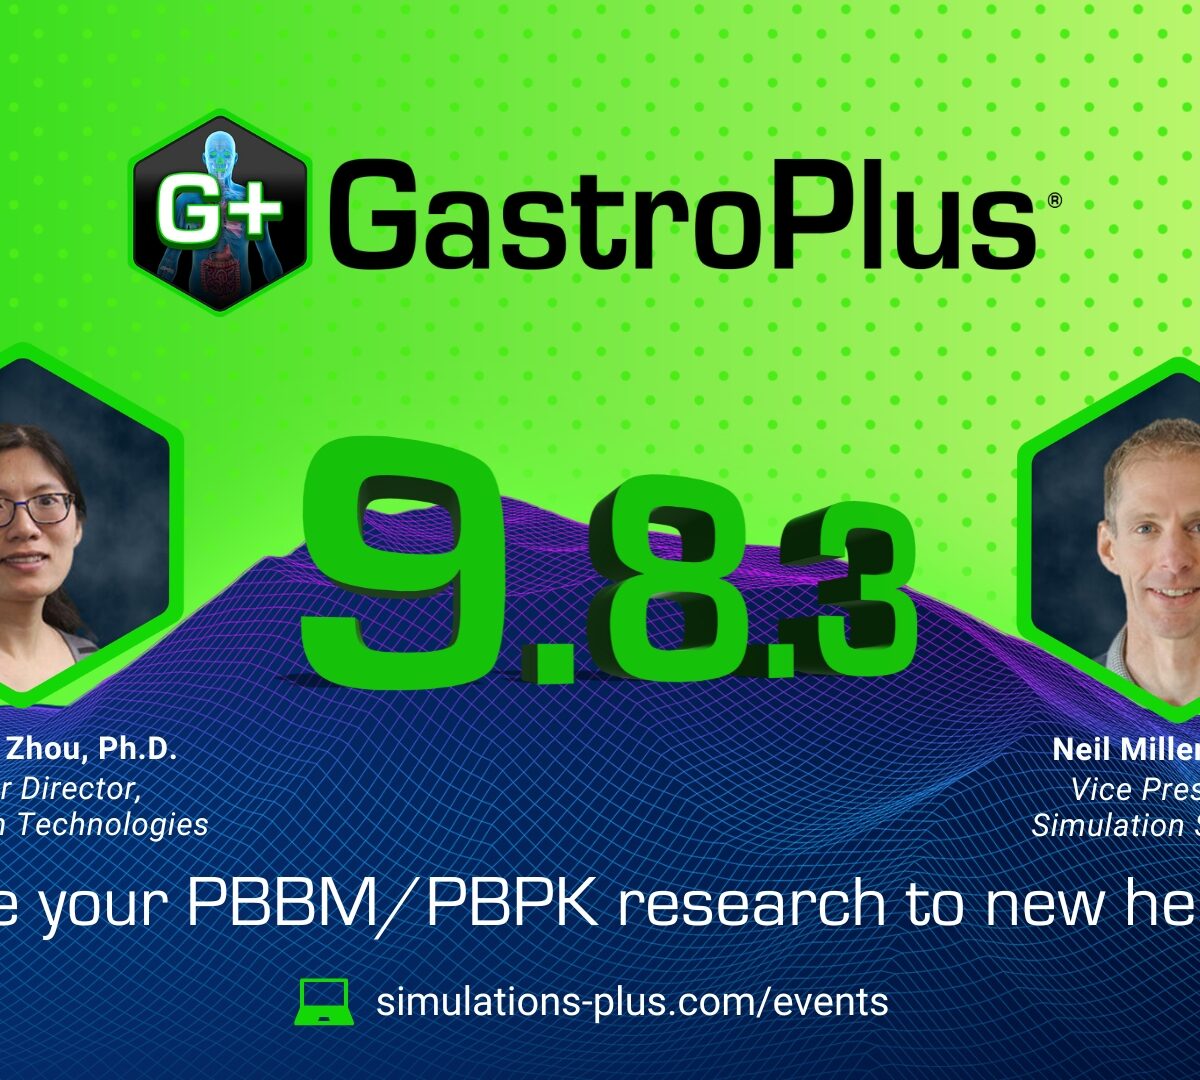 What’s New in GastroPlus® v9.8.3?